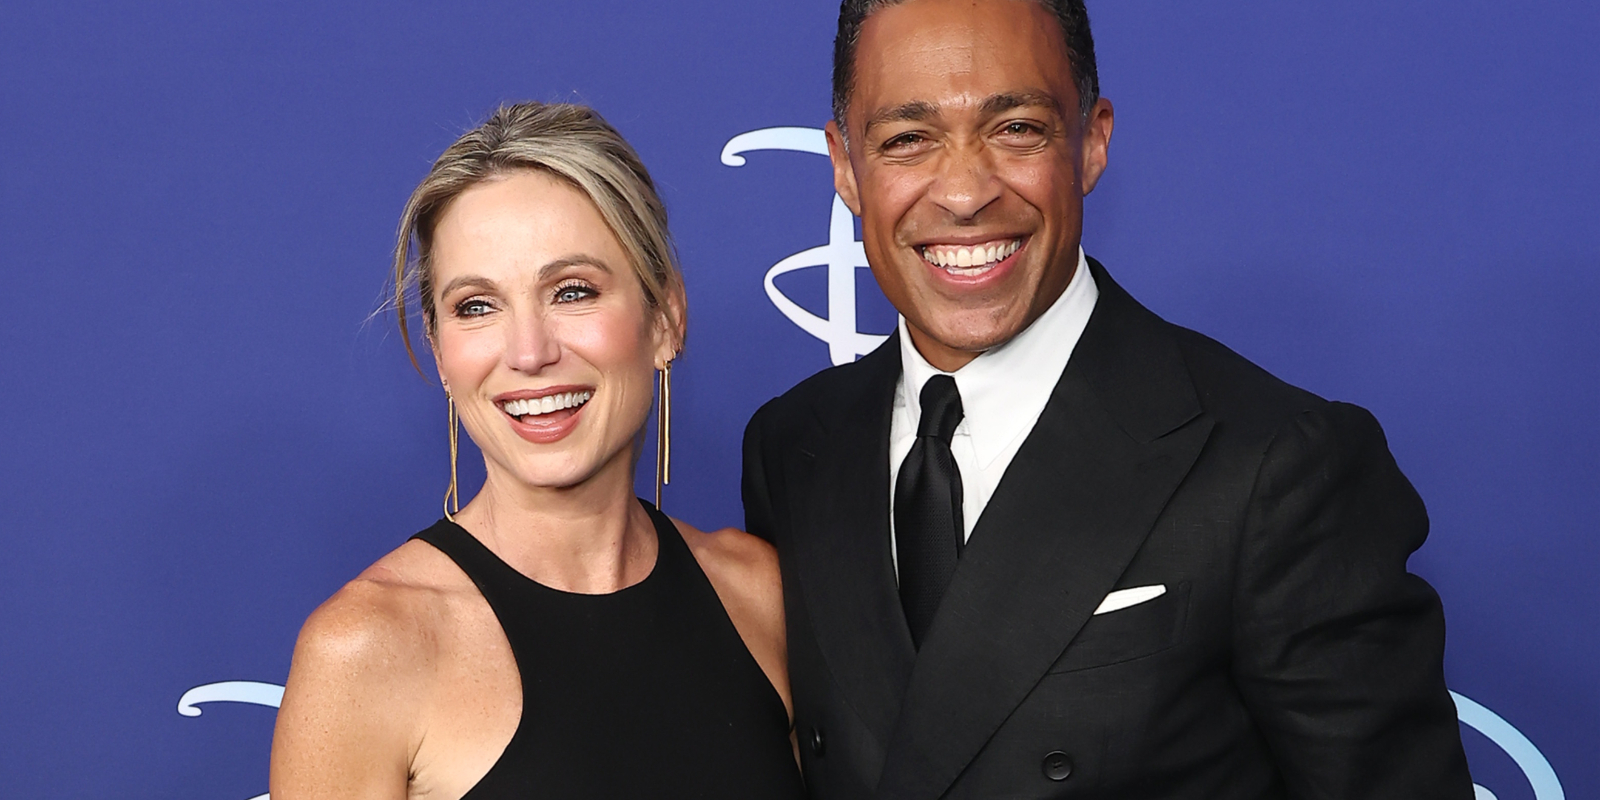 ‘Good Morning America’ Stars Amy Robach Once Said TJ Holmes ‘Has Got My Back’ and Was ‘Like a Brother’ Ahead of Alleged Romantic Relationship